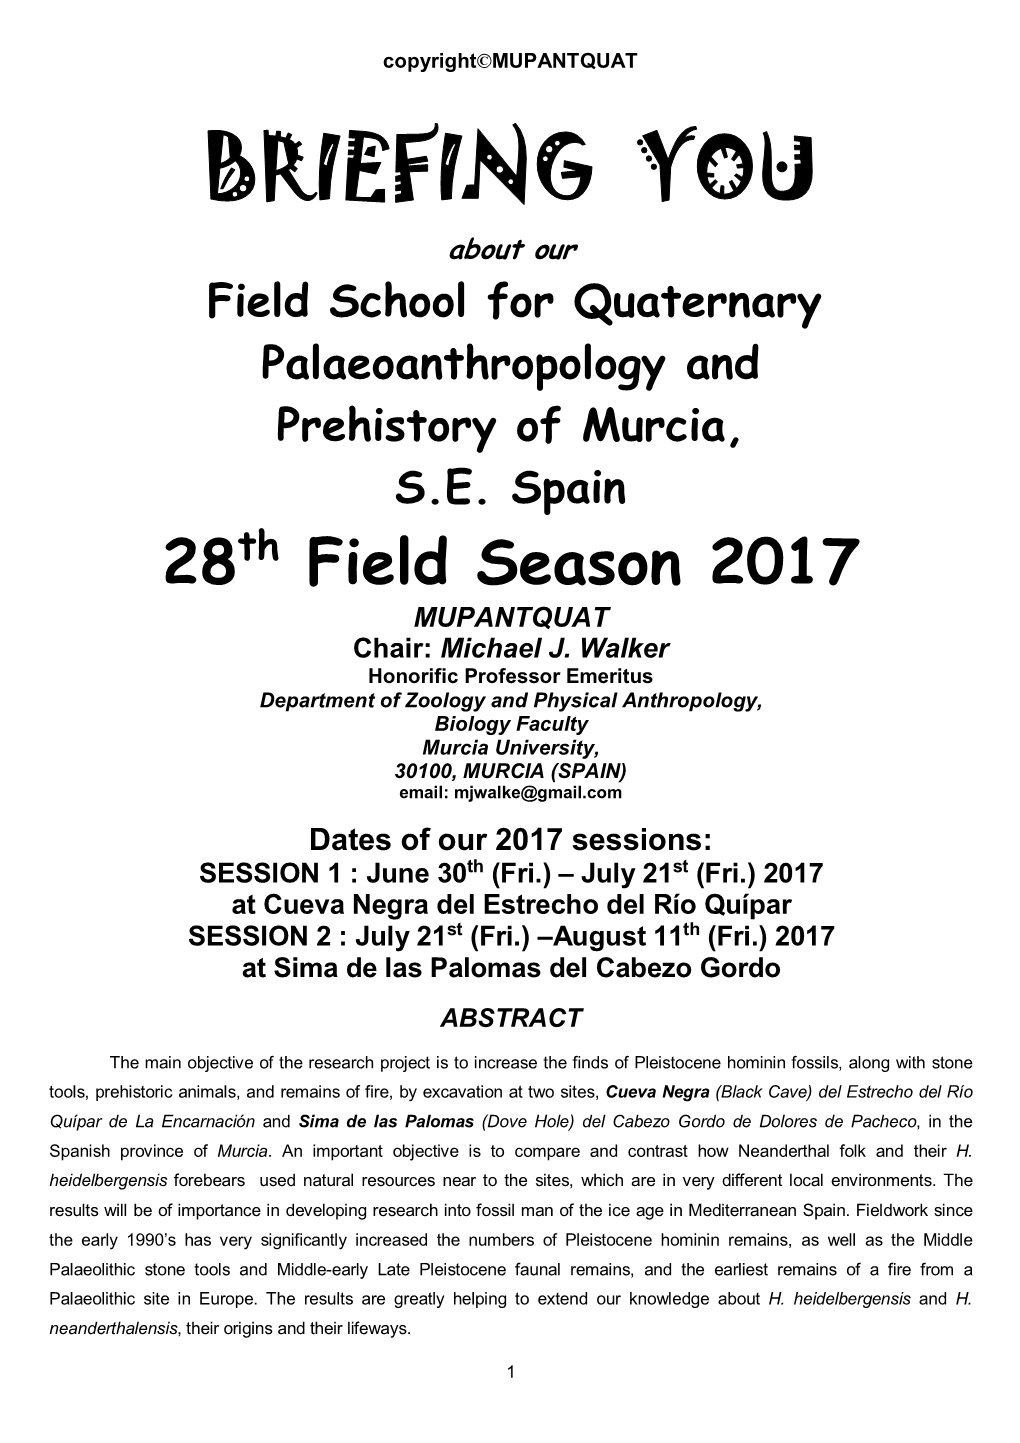 BRIEFING YOU About Our Field School for Quaternary Palaeoanthropology and Prehistory of Murcia, S.E